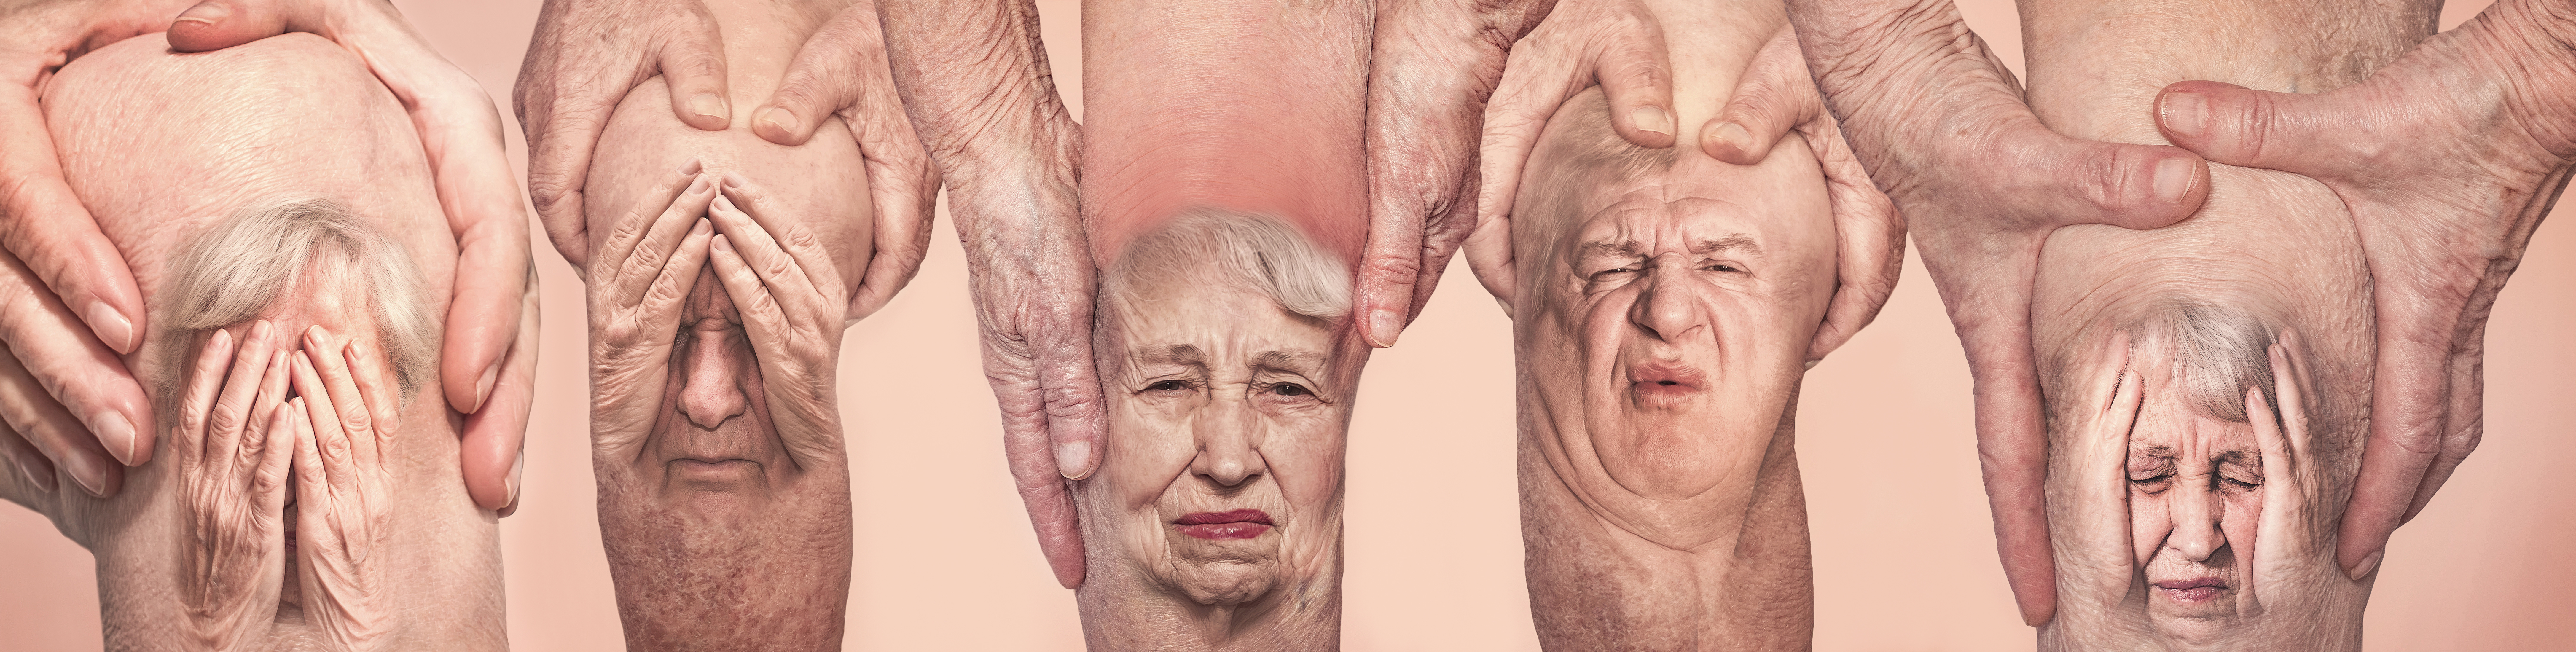 Senior men and woman holding the knee with pain. Collage. Concept of abstract pain and despair. The elderly pensioner and problems. Old age and illnesses. 86-year-old Caucasian model. healthcare concepts